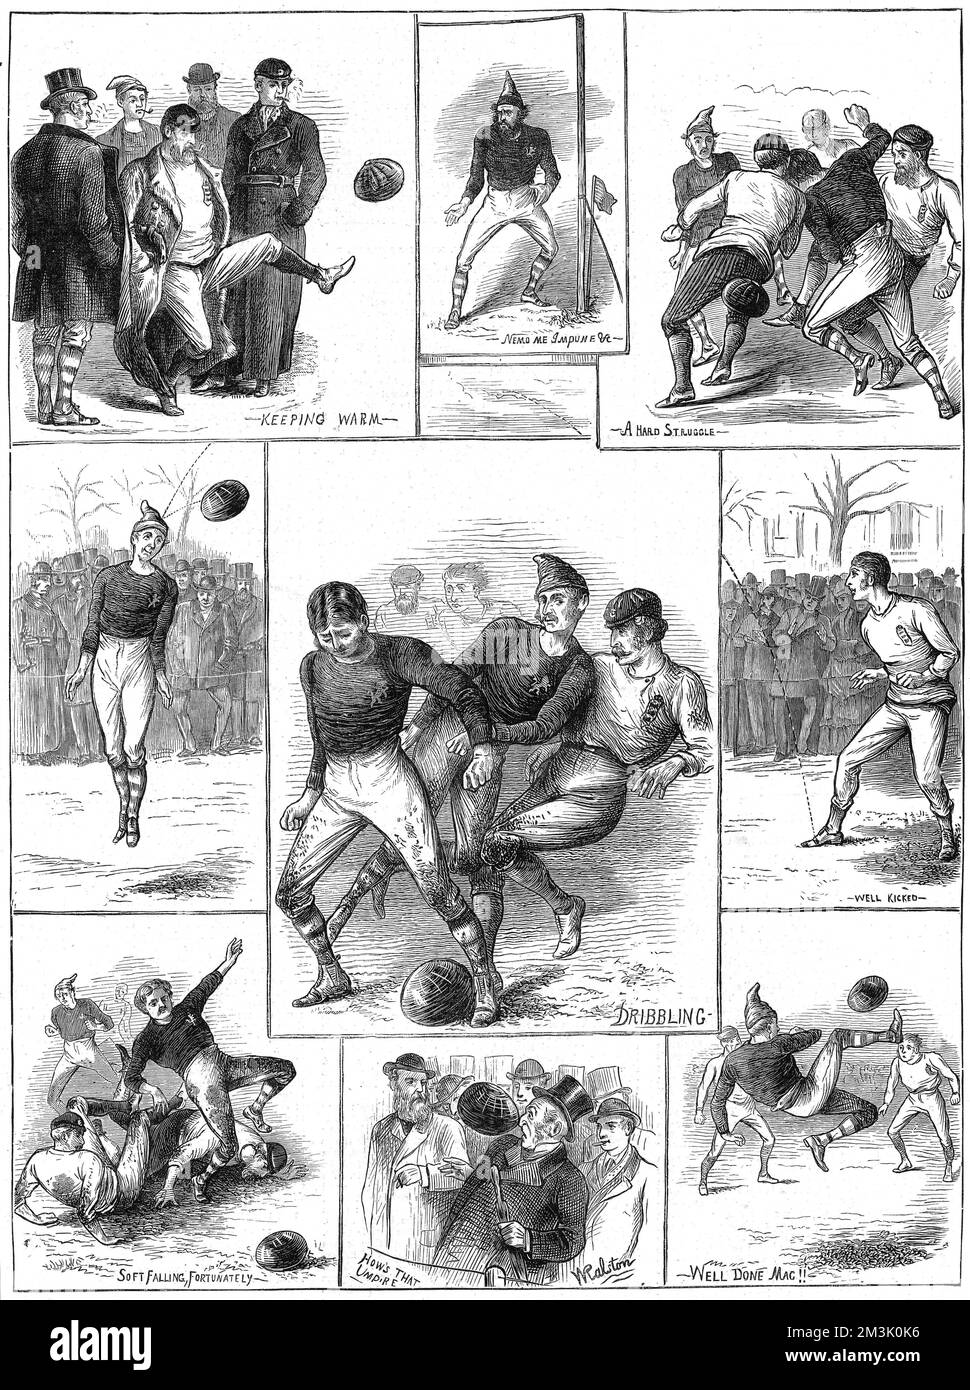 The Scotland vs. England Friendly of 30th November 1872, played at West of Scotland Cricket Club Ground, Partick, near Glasgow.   This was the first international football match played in Scotland under Football Association rules. The match resulted in a goal-less draw.  1872 Stock Photo